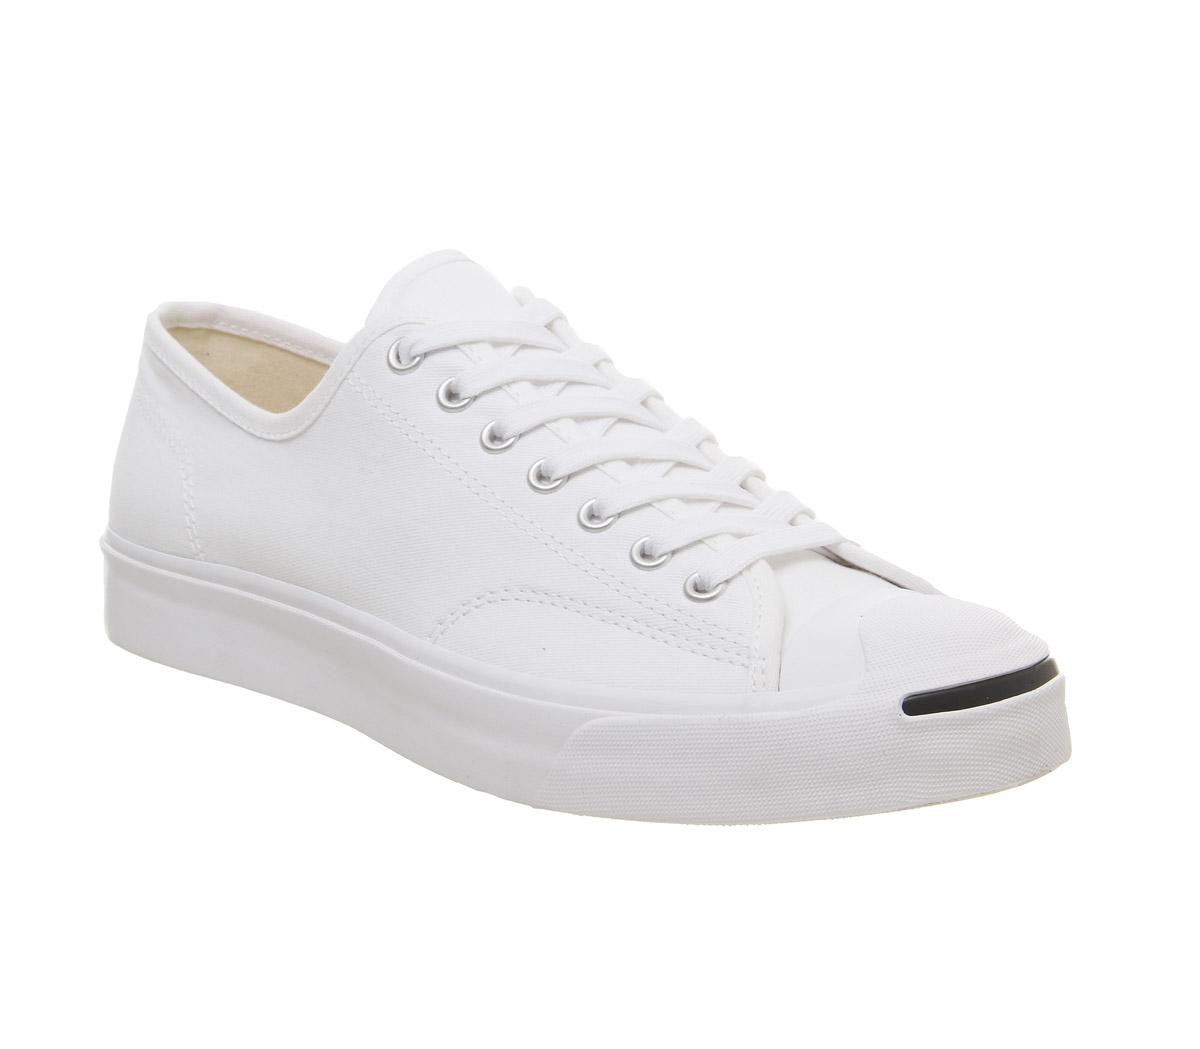 converse jack purcell uk